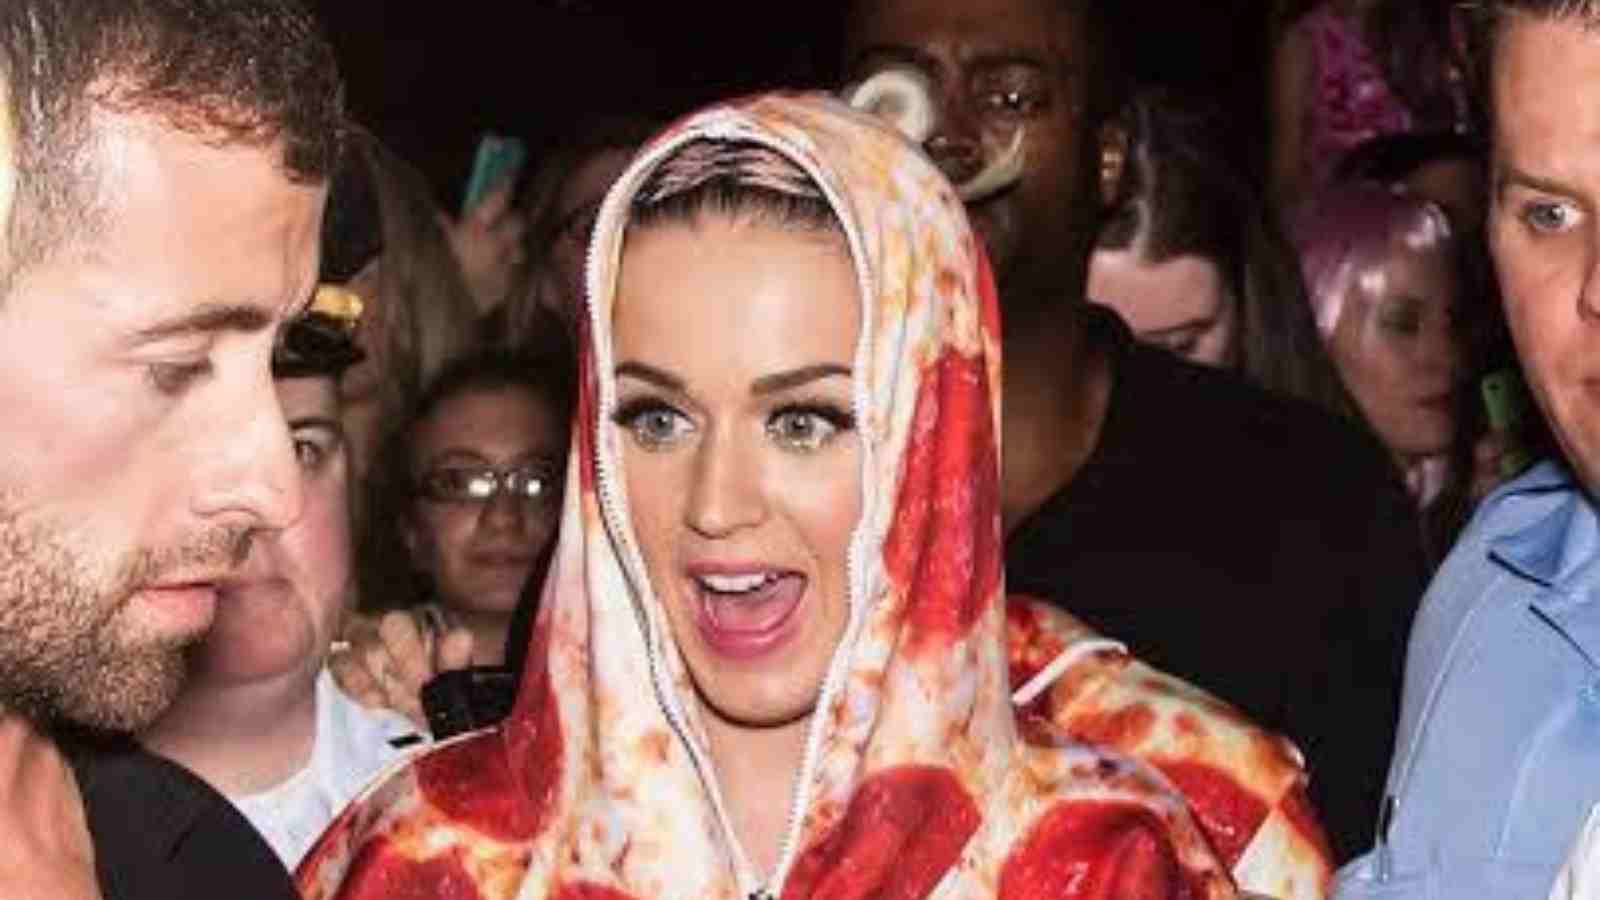 Katy Perry once again proved the relationship between her and the pizza as she was found throwing pizza slices into the crowd